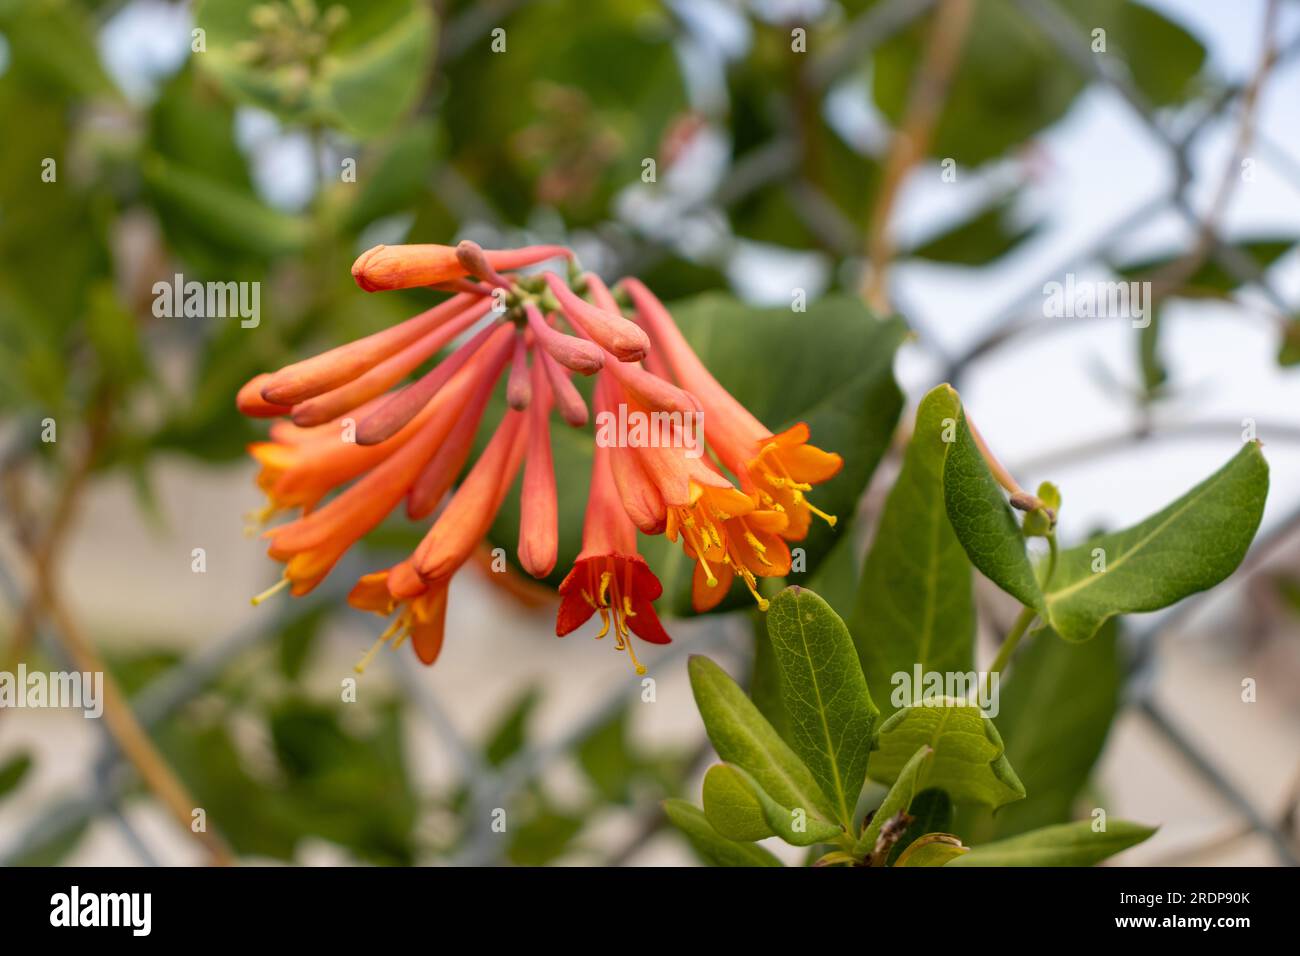 Red tubular flowers with yellow centers hanging from green leafy branch - blurred leaf background Stock Photo